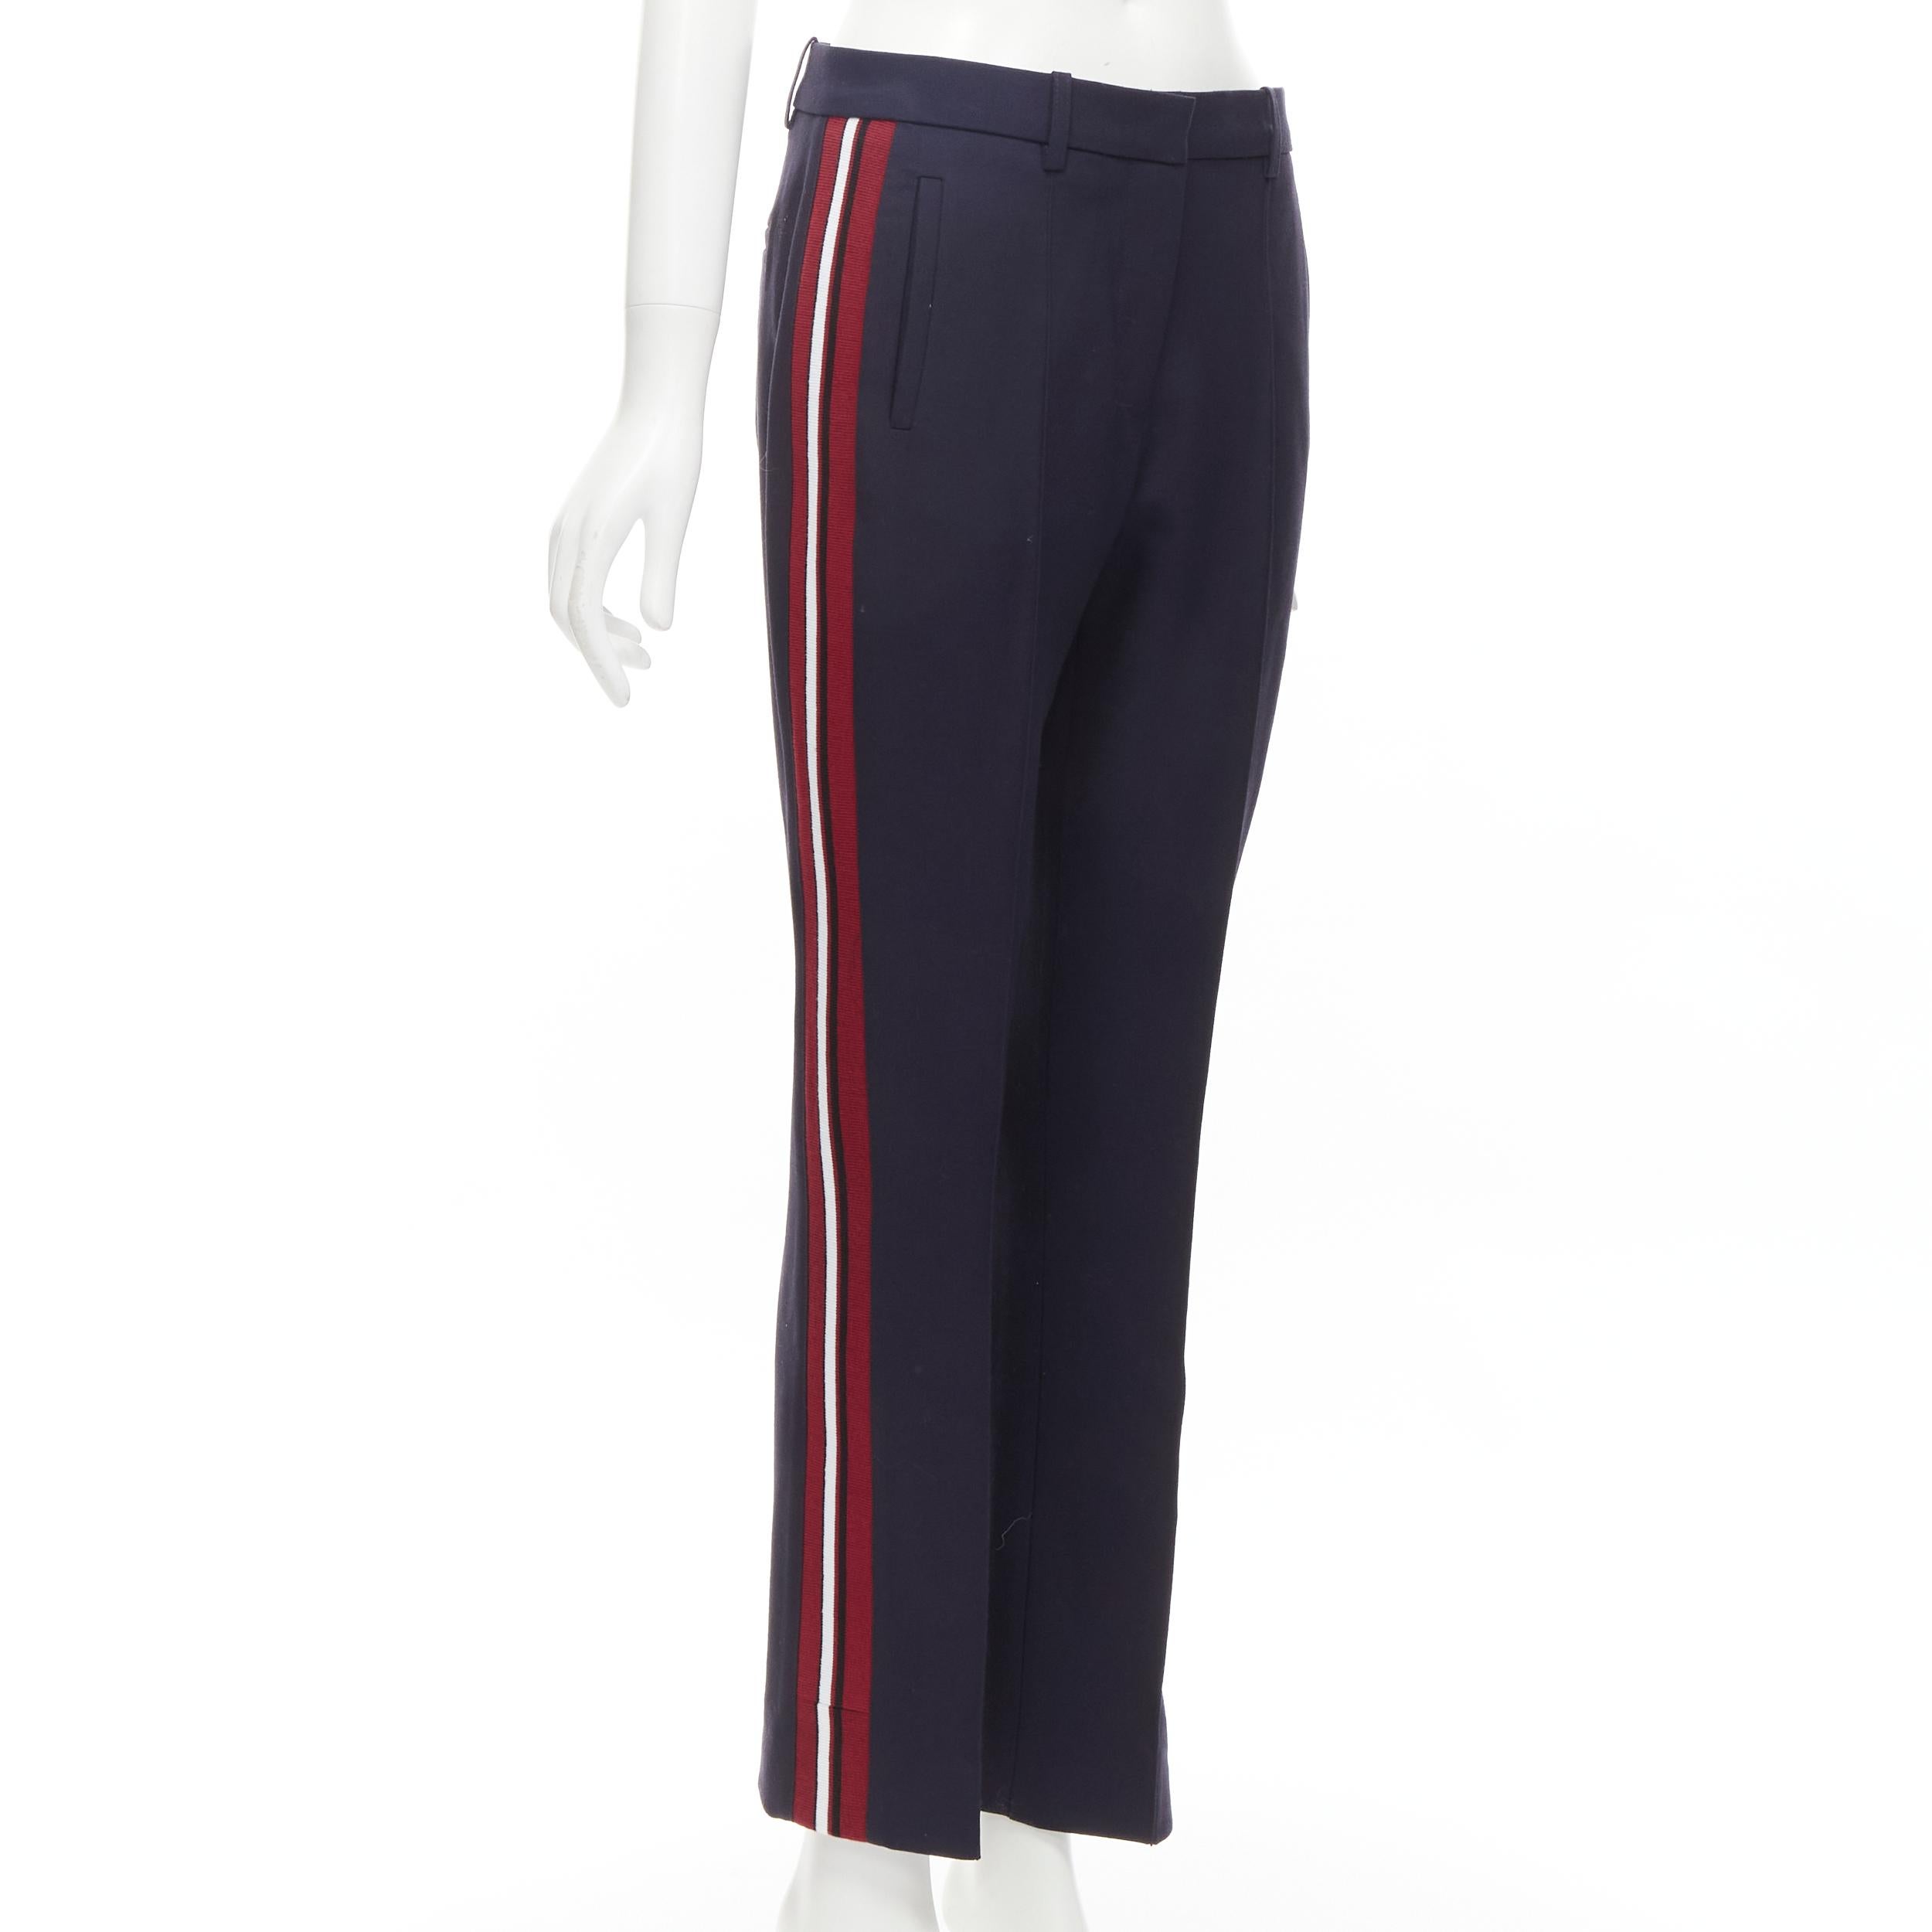 VVB VICTORIA BECKHAM navy wool red stripe web trim trouseres UK8 S
Brand: VVB Victoria Beckham
Extra Detail: 4-pocket design. Web trim down side of leg.

CONDITION:
Condition: Excellent, this item was pre-owned and is in excellent condition.